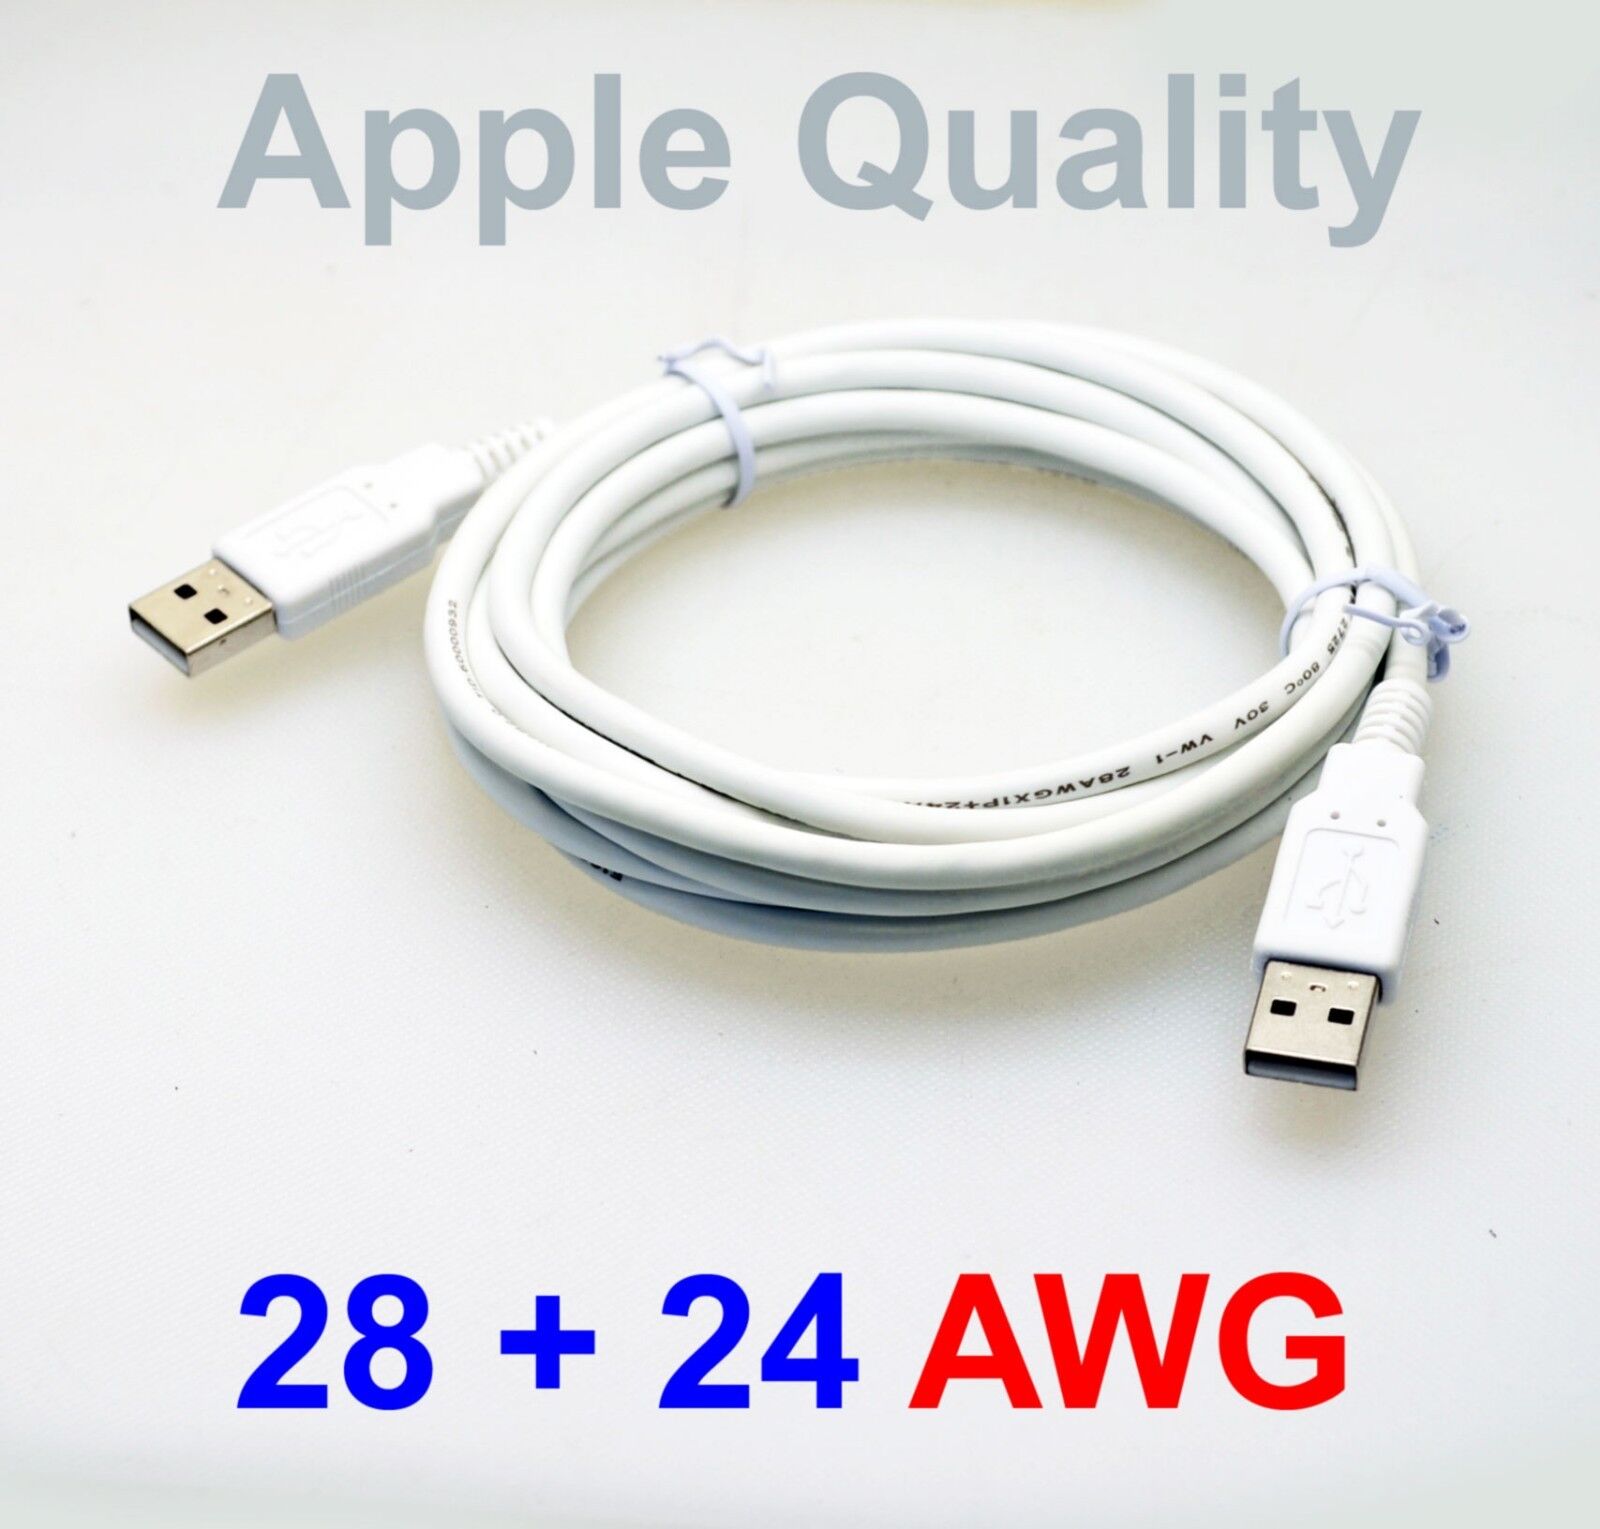 High Quality 10FT Apple White USB 2.0 Type-A Male to Male Cable (USB2.0-AM-10FT)